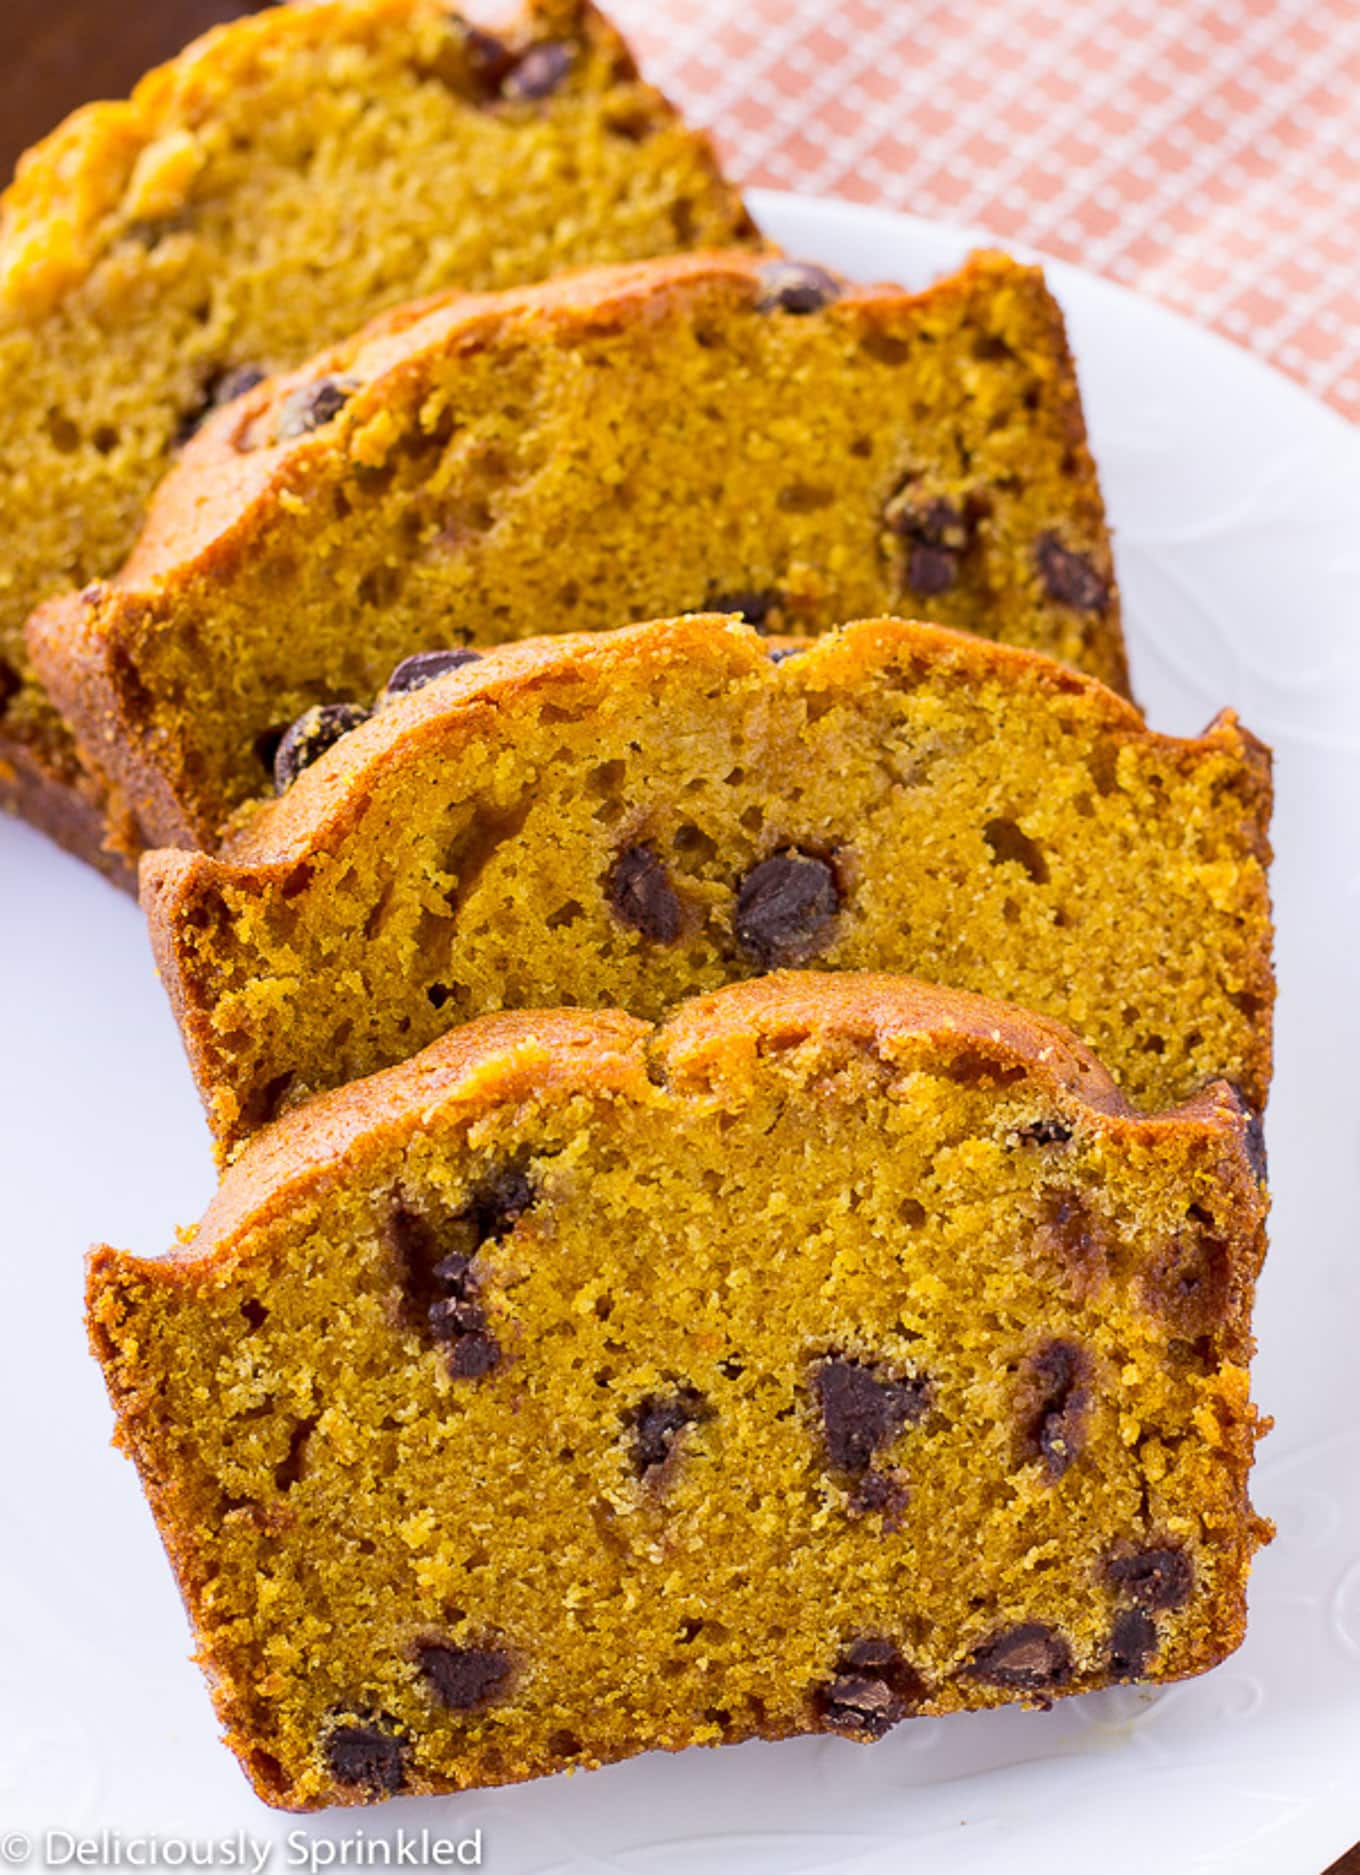 Slices of chocolate chip pumpkin bread fanned out on a white plate.